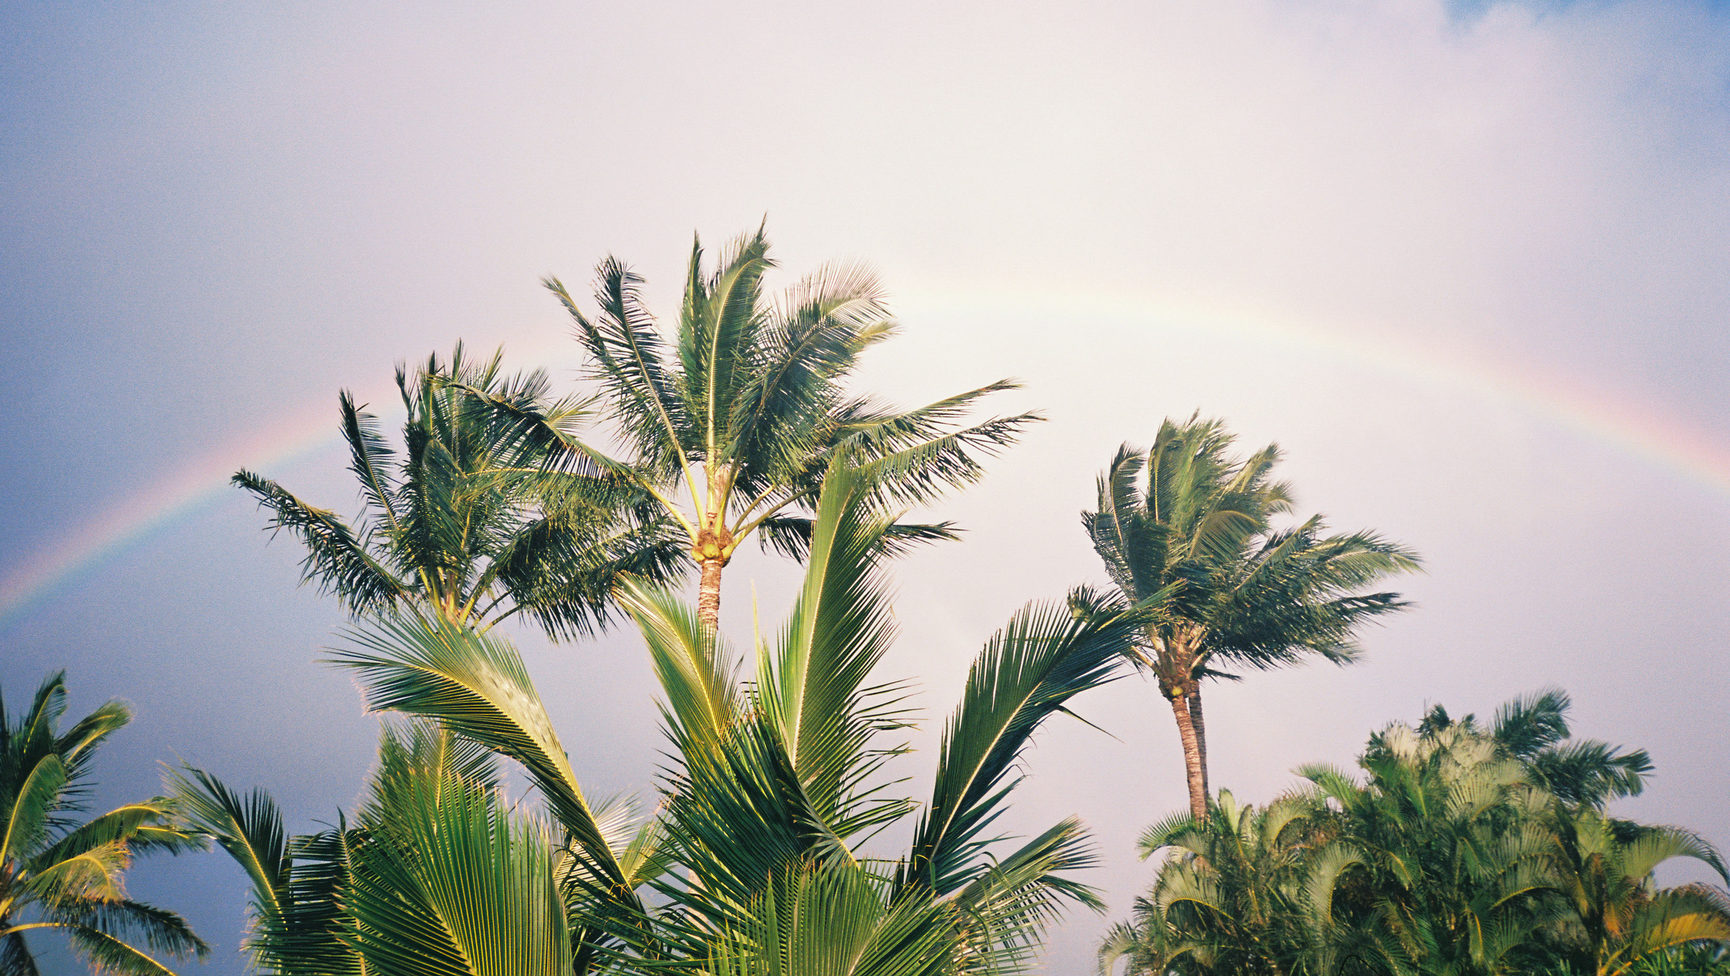 Palm trees with a rainbow behind.